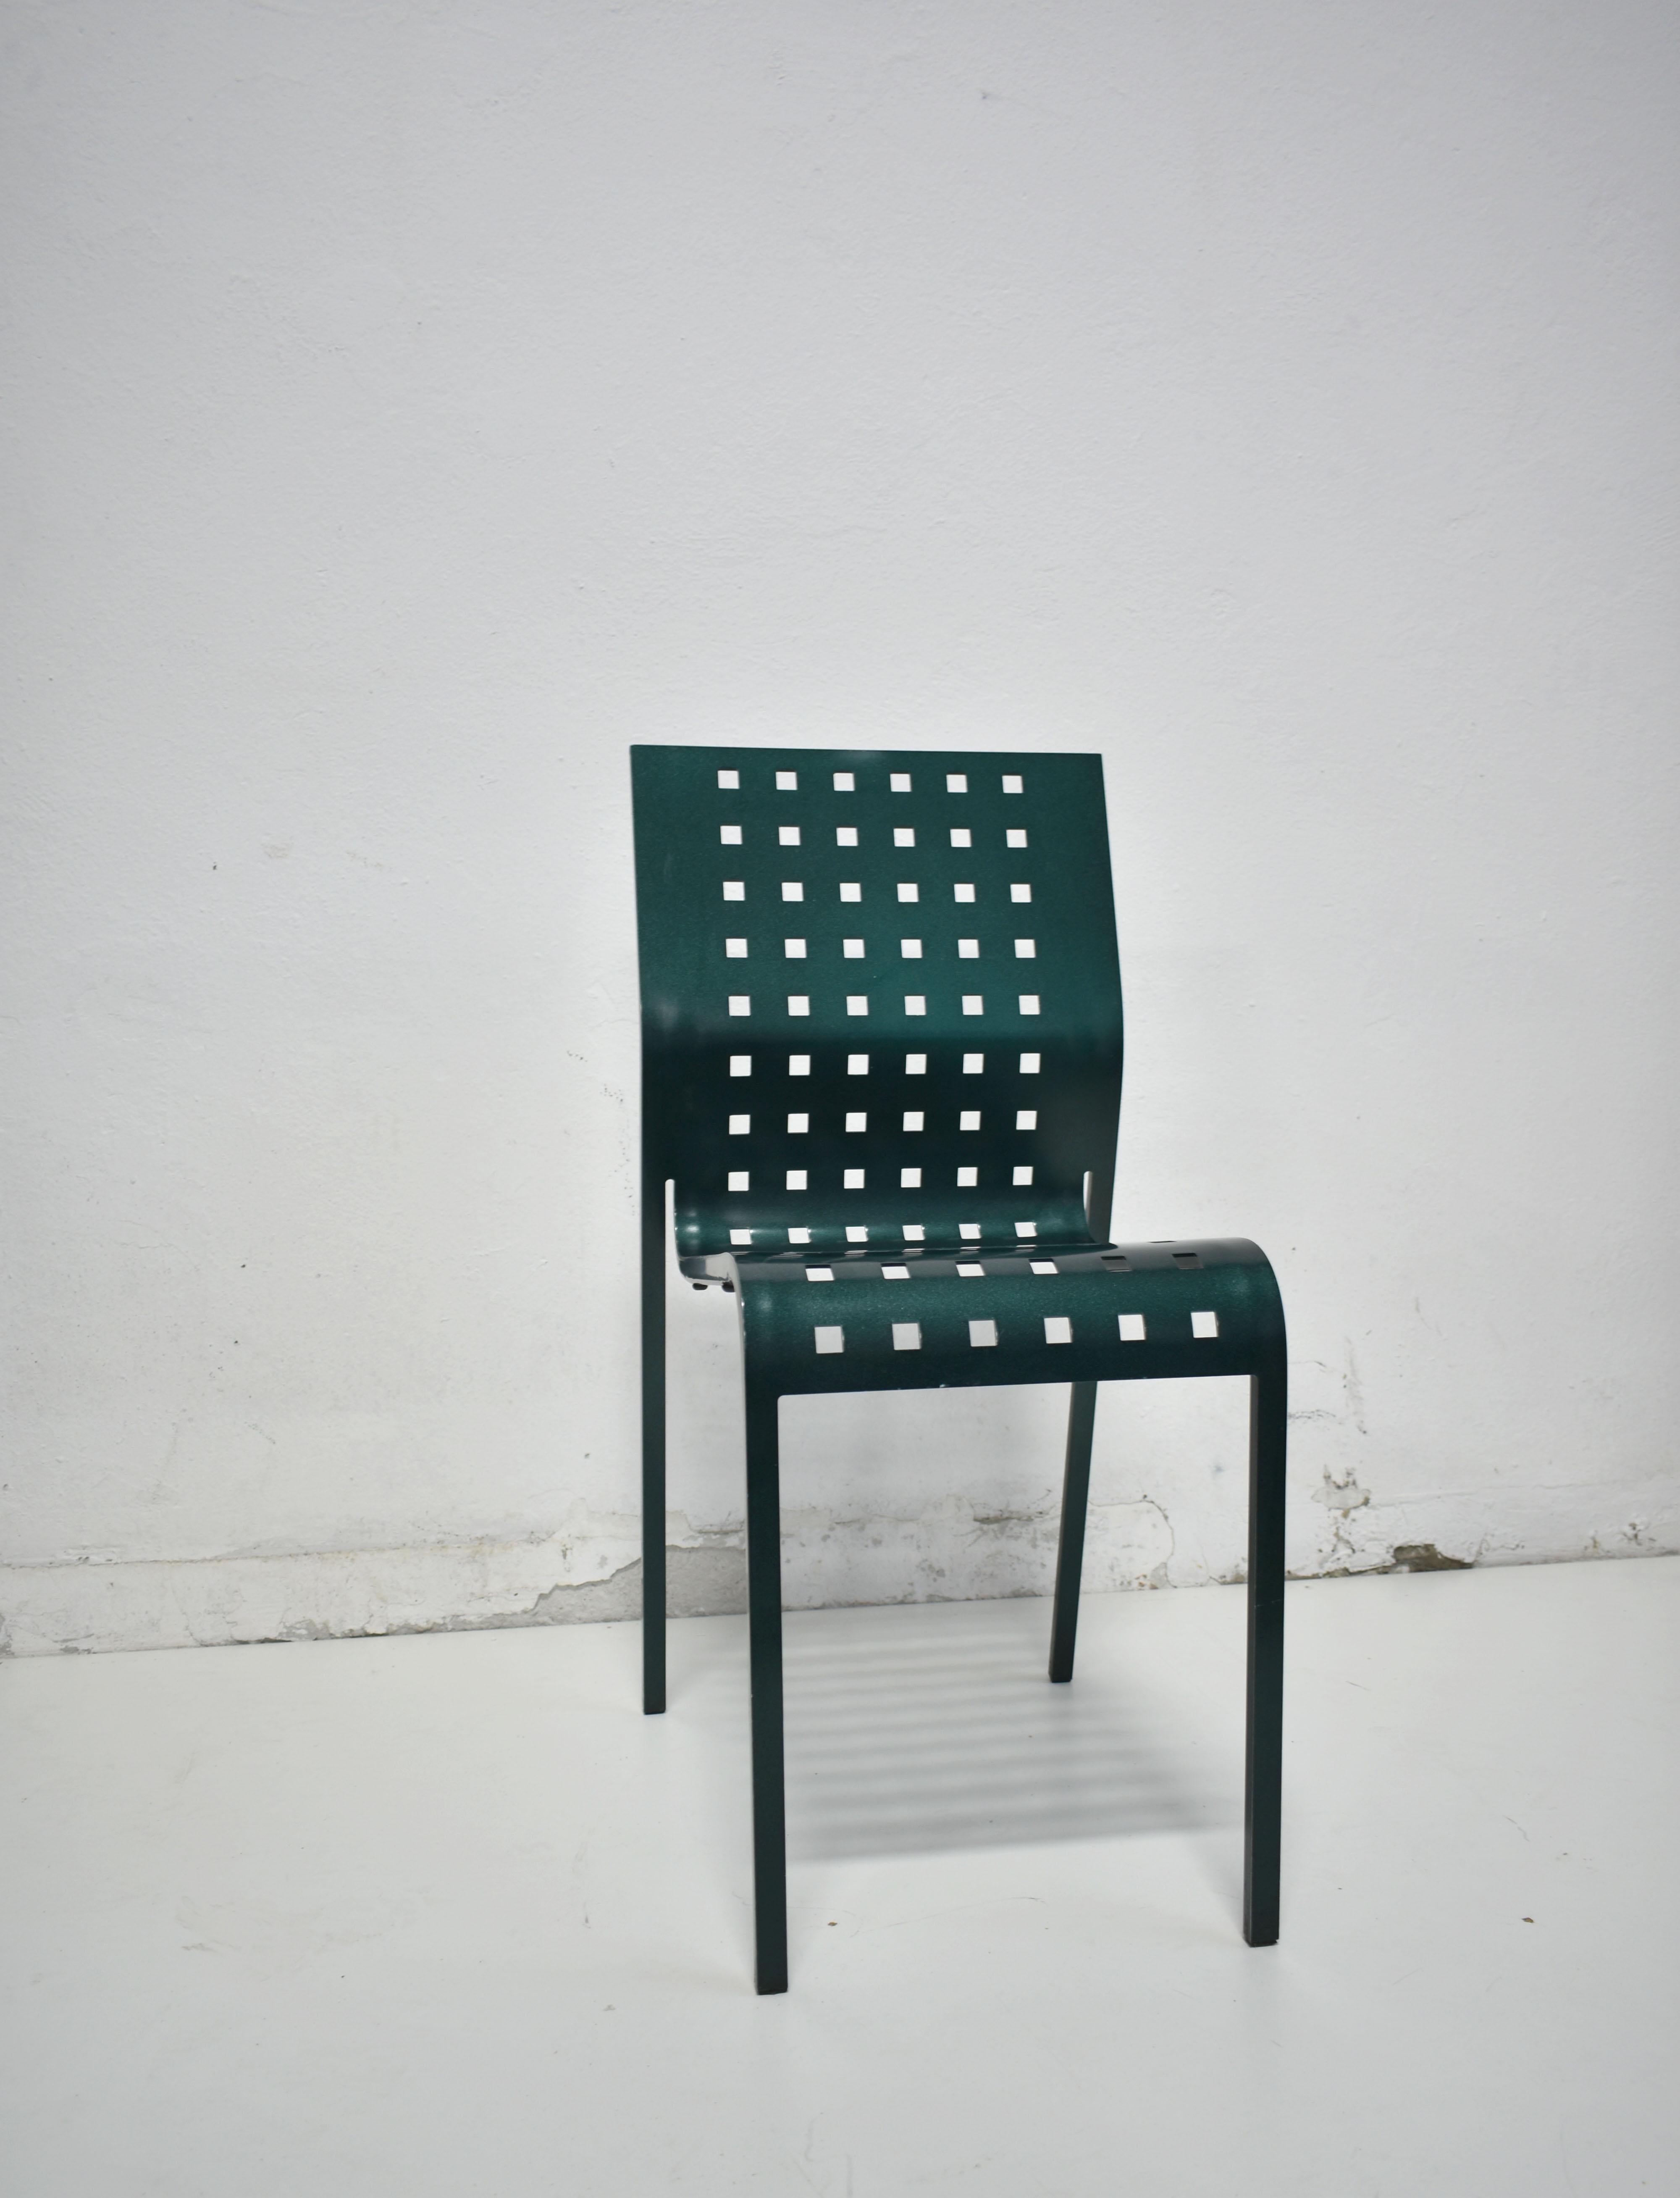 Pair of stacking Mirandolina chairs No 2068 designed by Pietro Arosio in 1993 for the high-end furniture company Zanotta, Italy

The chair is made from one piece of curved and perforated aluminium.

   